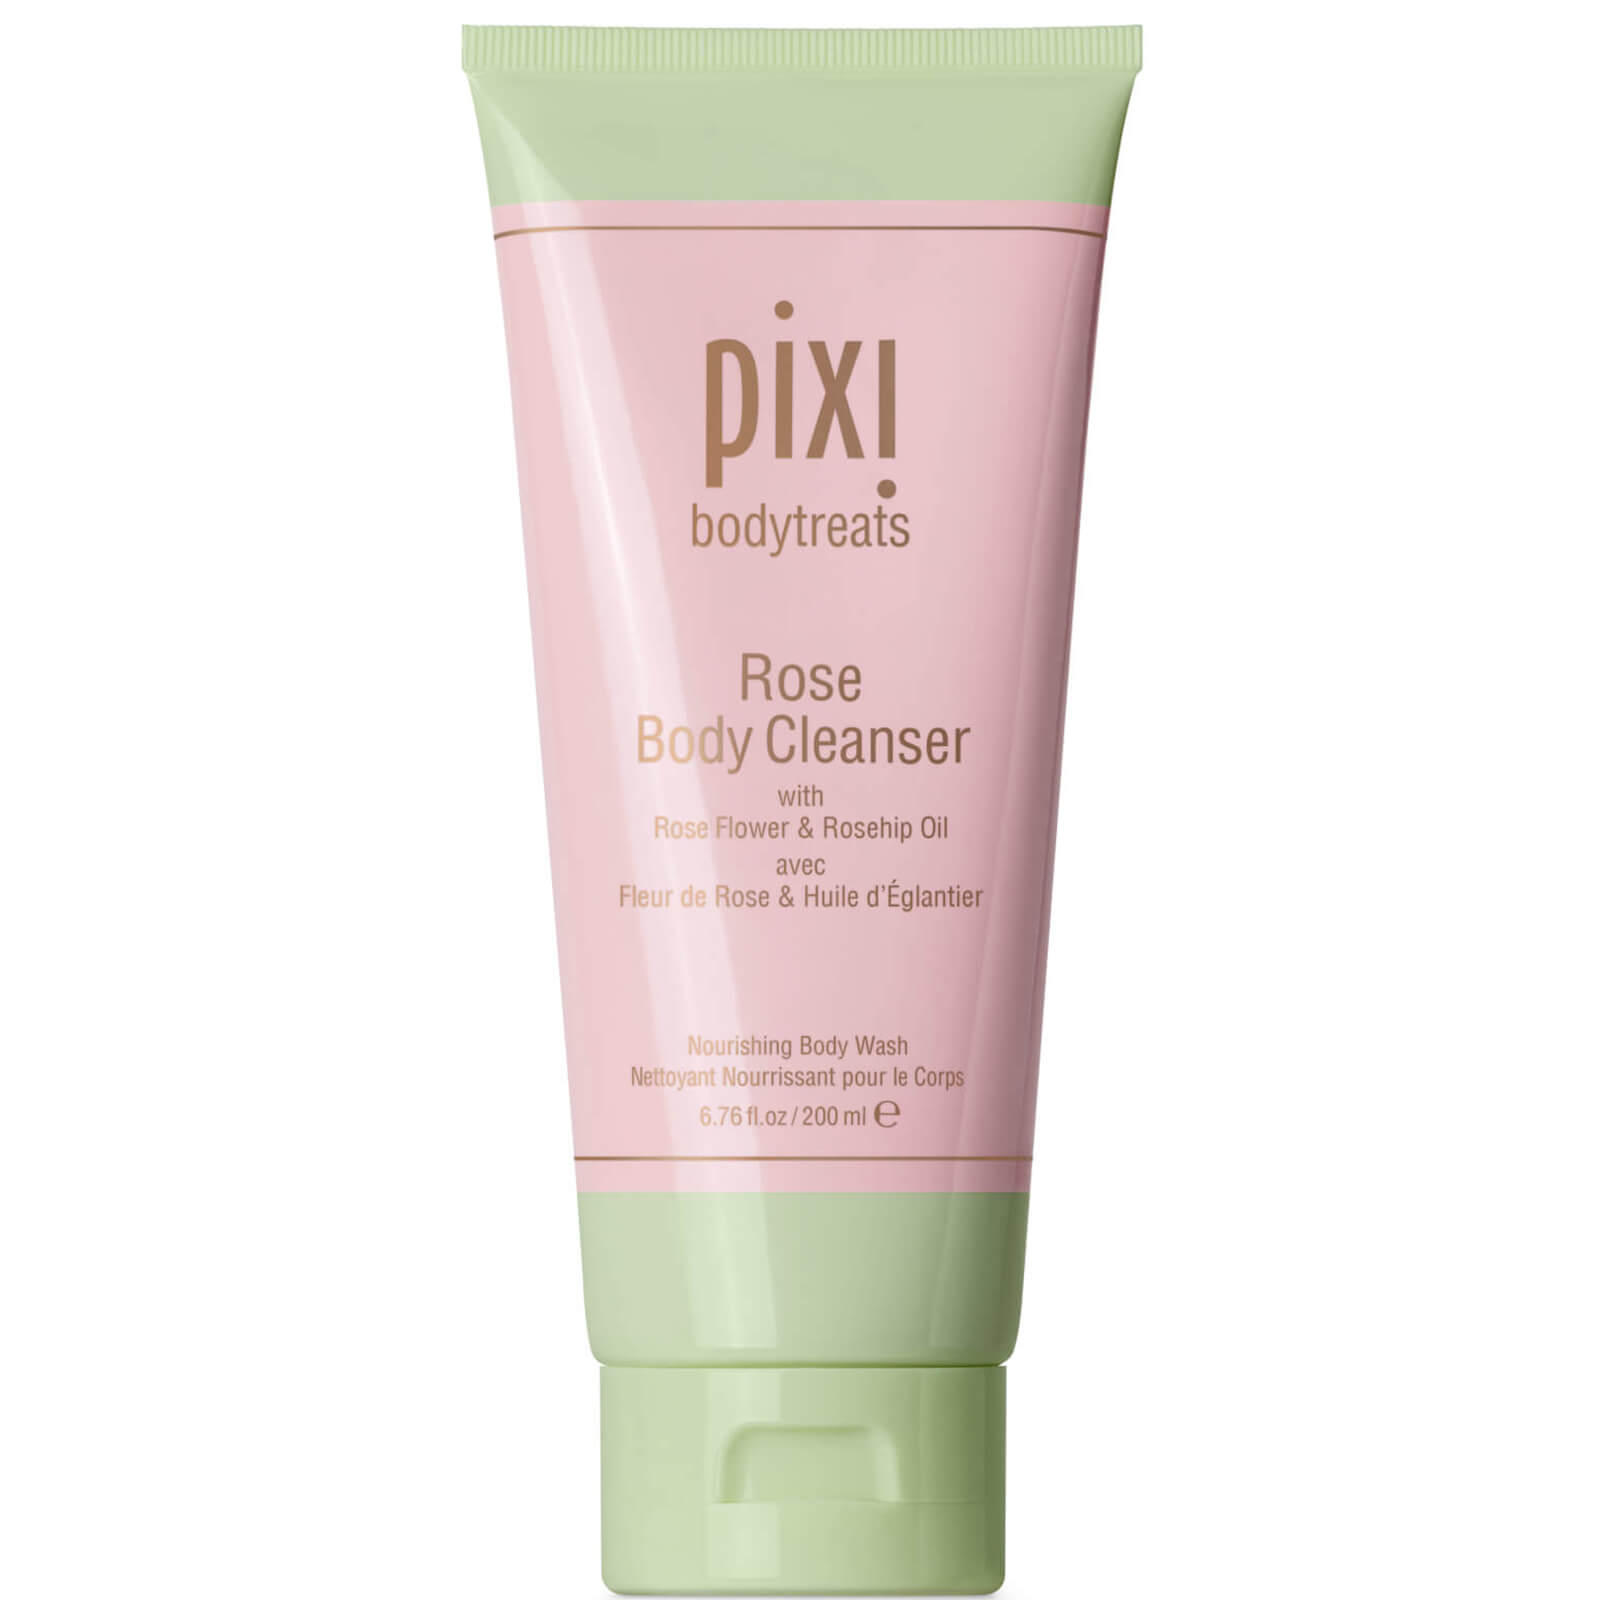 Photos - Facial / Body Cleansing Product PIXI Rose Body Cleanser 200ml 84001